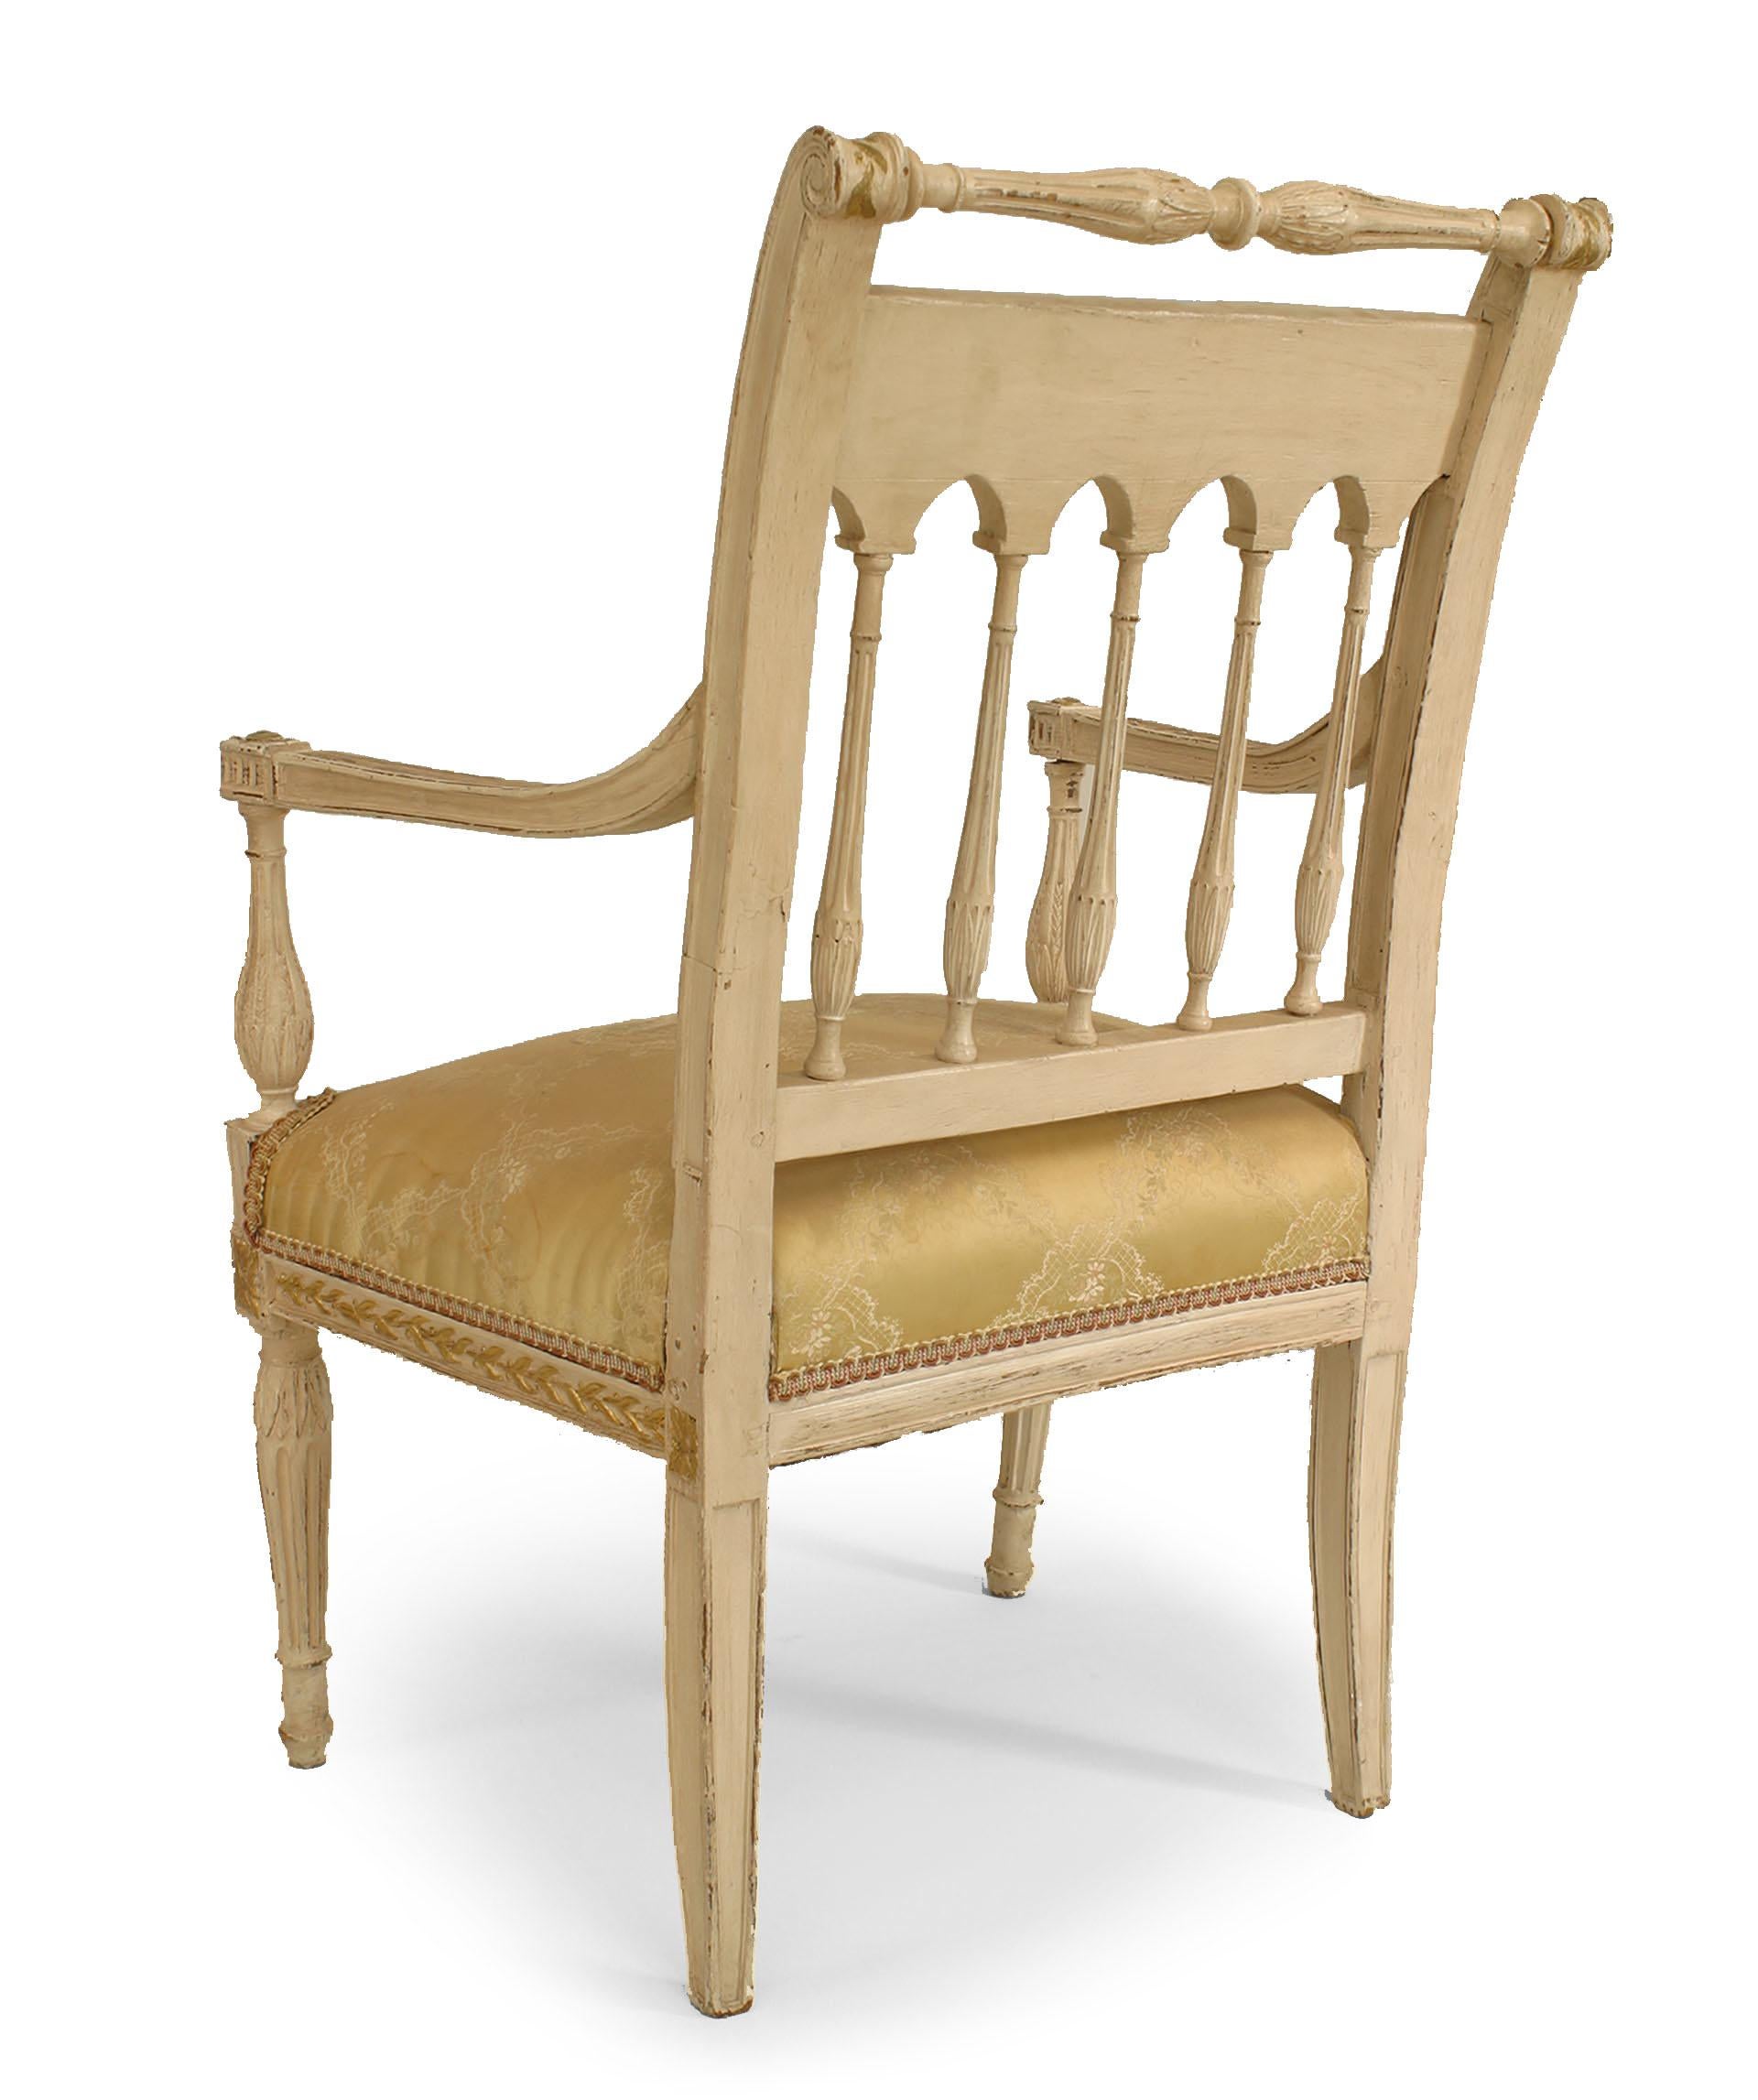 Painted 19th Century French Directoire Style Gilt Arm Chair For Sale